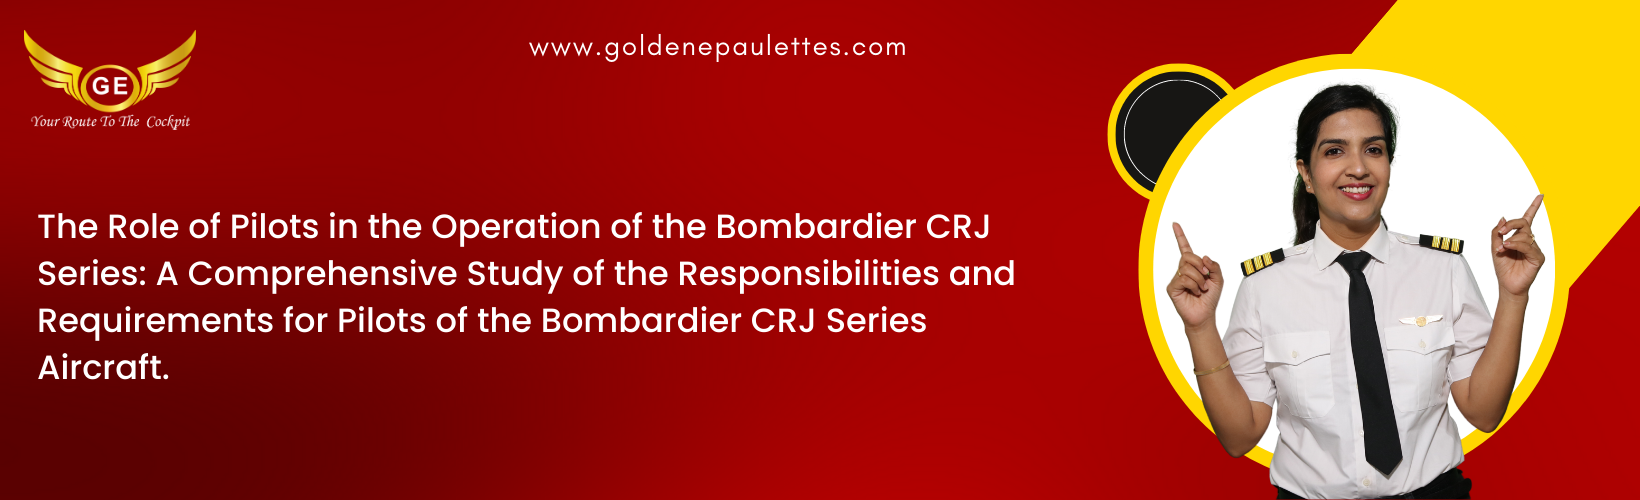 17.The Role of Pilots in the Operation of the Bombardier CRJ Series